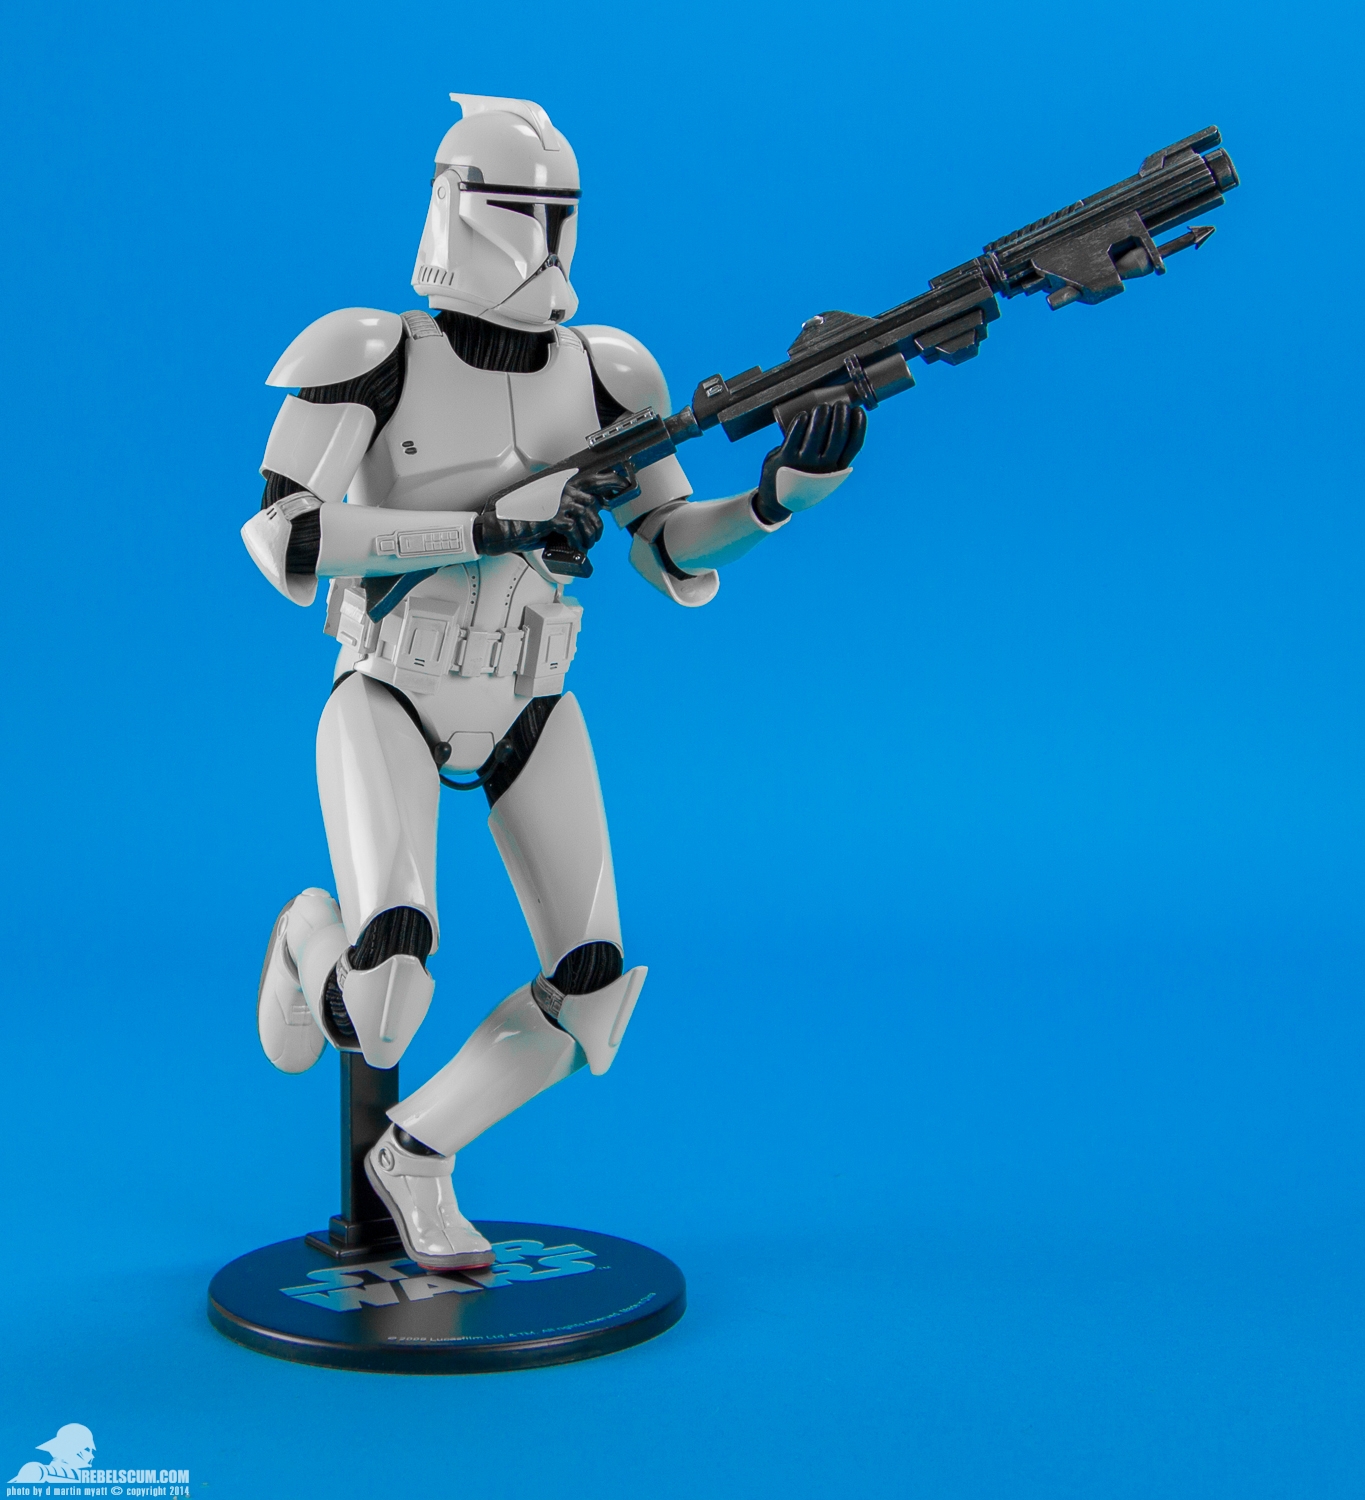 Shiny-Clone-Trooper-Deluxe-Sixth-Scale-Figure-Sideshow-015.jpg